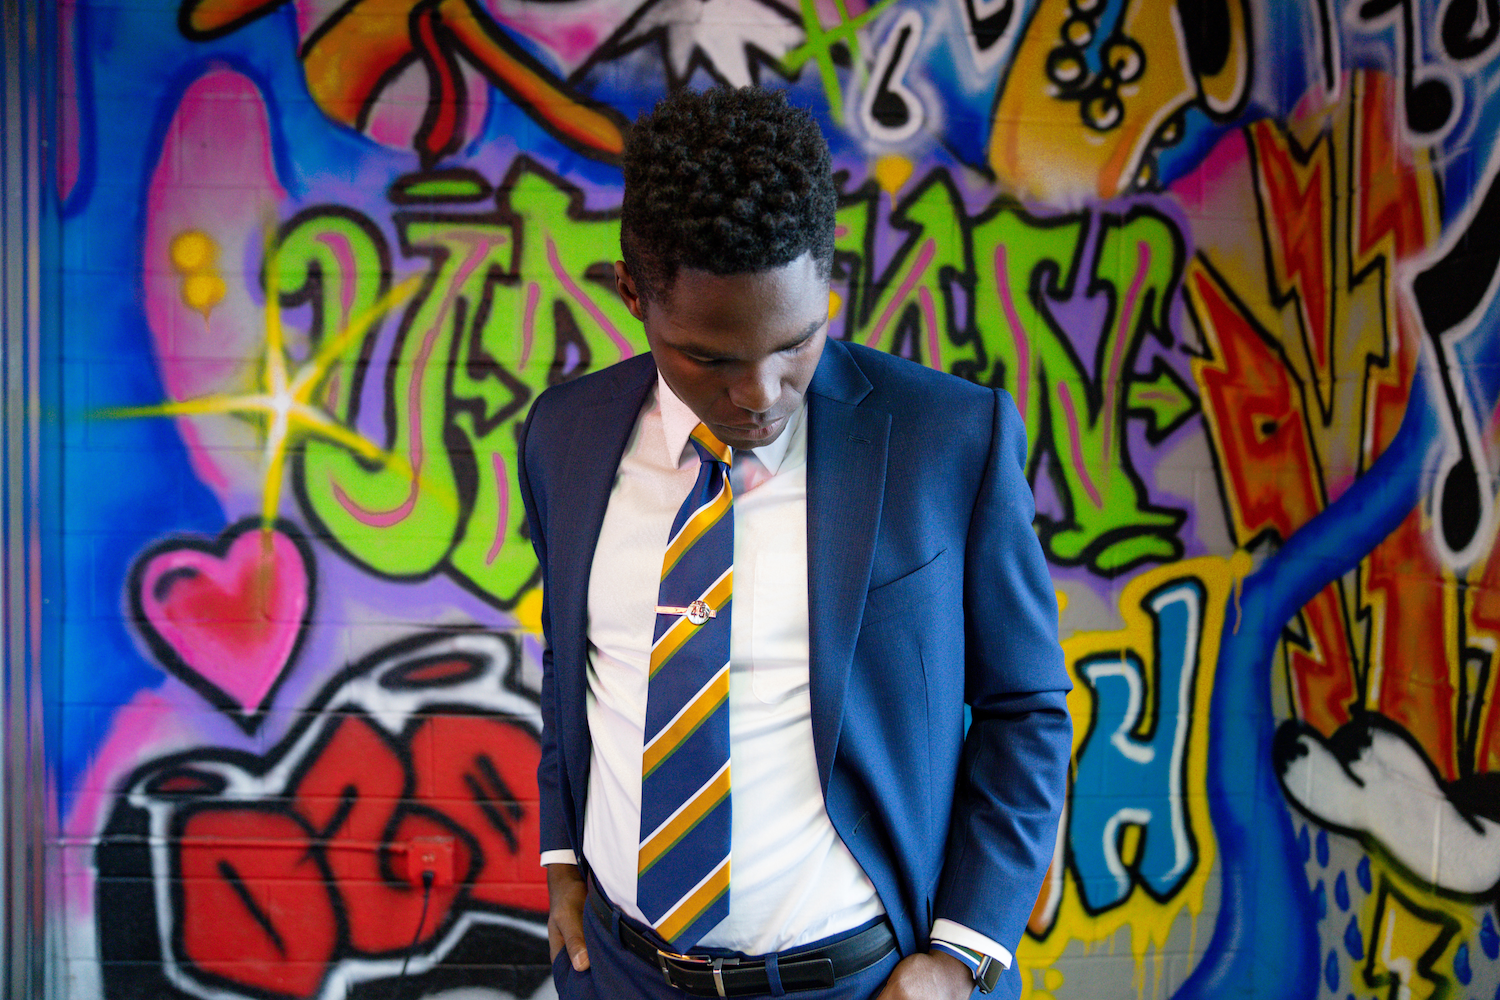 A man in a suit on modeling in front of a graffiti wall